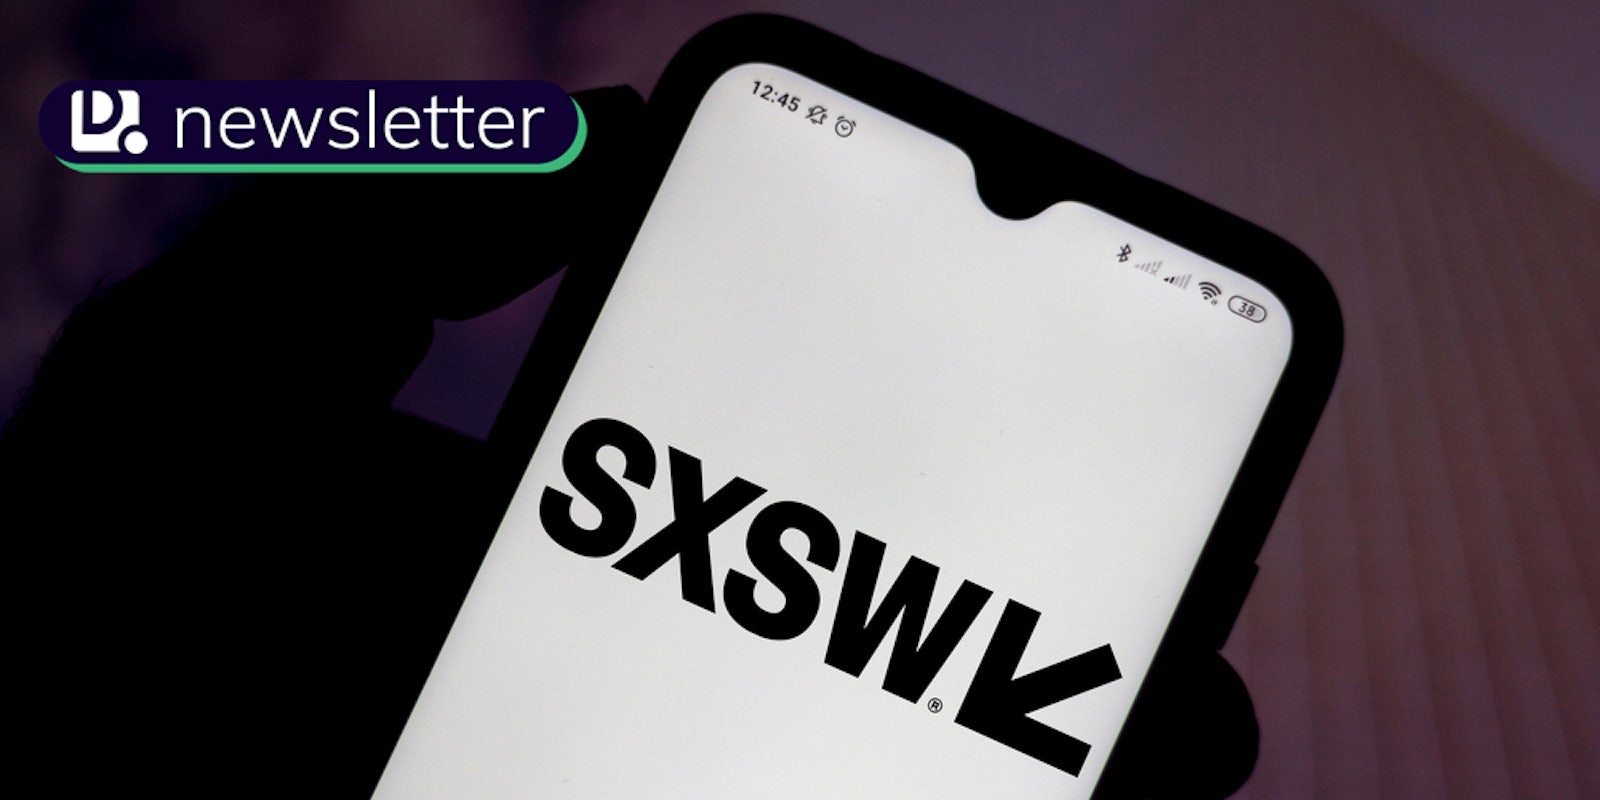 In this photo illustration the South by Southwest (SXSW) logo seen displayed on a smartphone screen. The Daily Dot newsletter logo is in the top left corner.